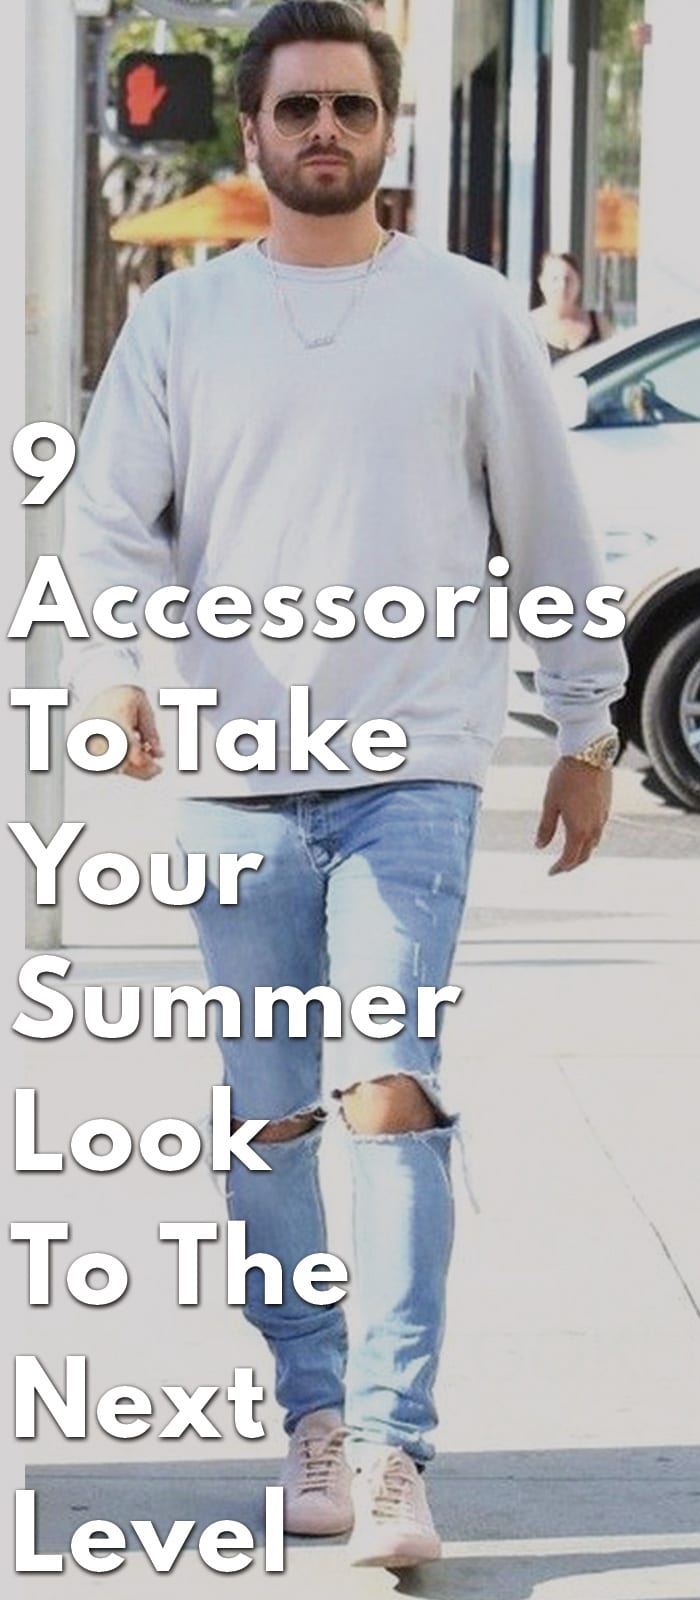 9-Accessories-To-Take-Your-Summer-Look-To-The-Next-Level